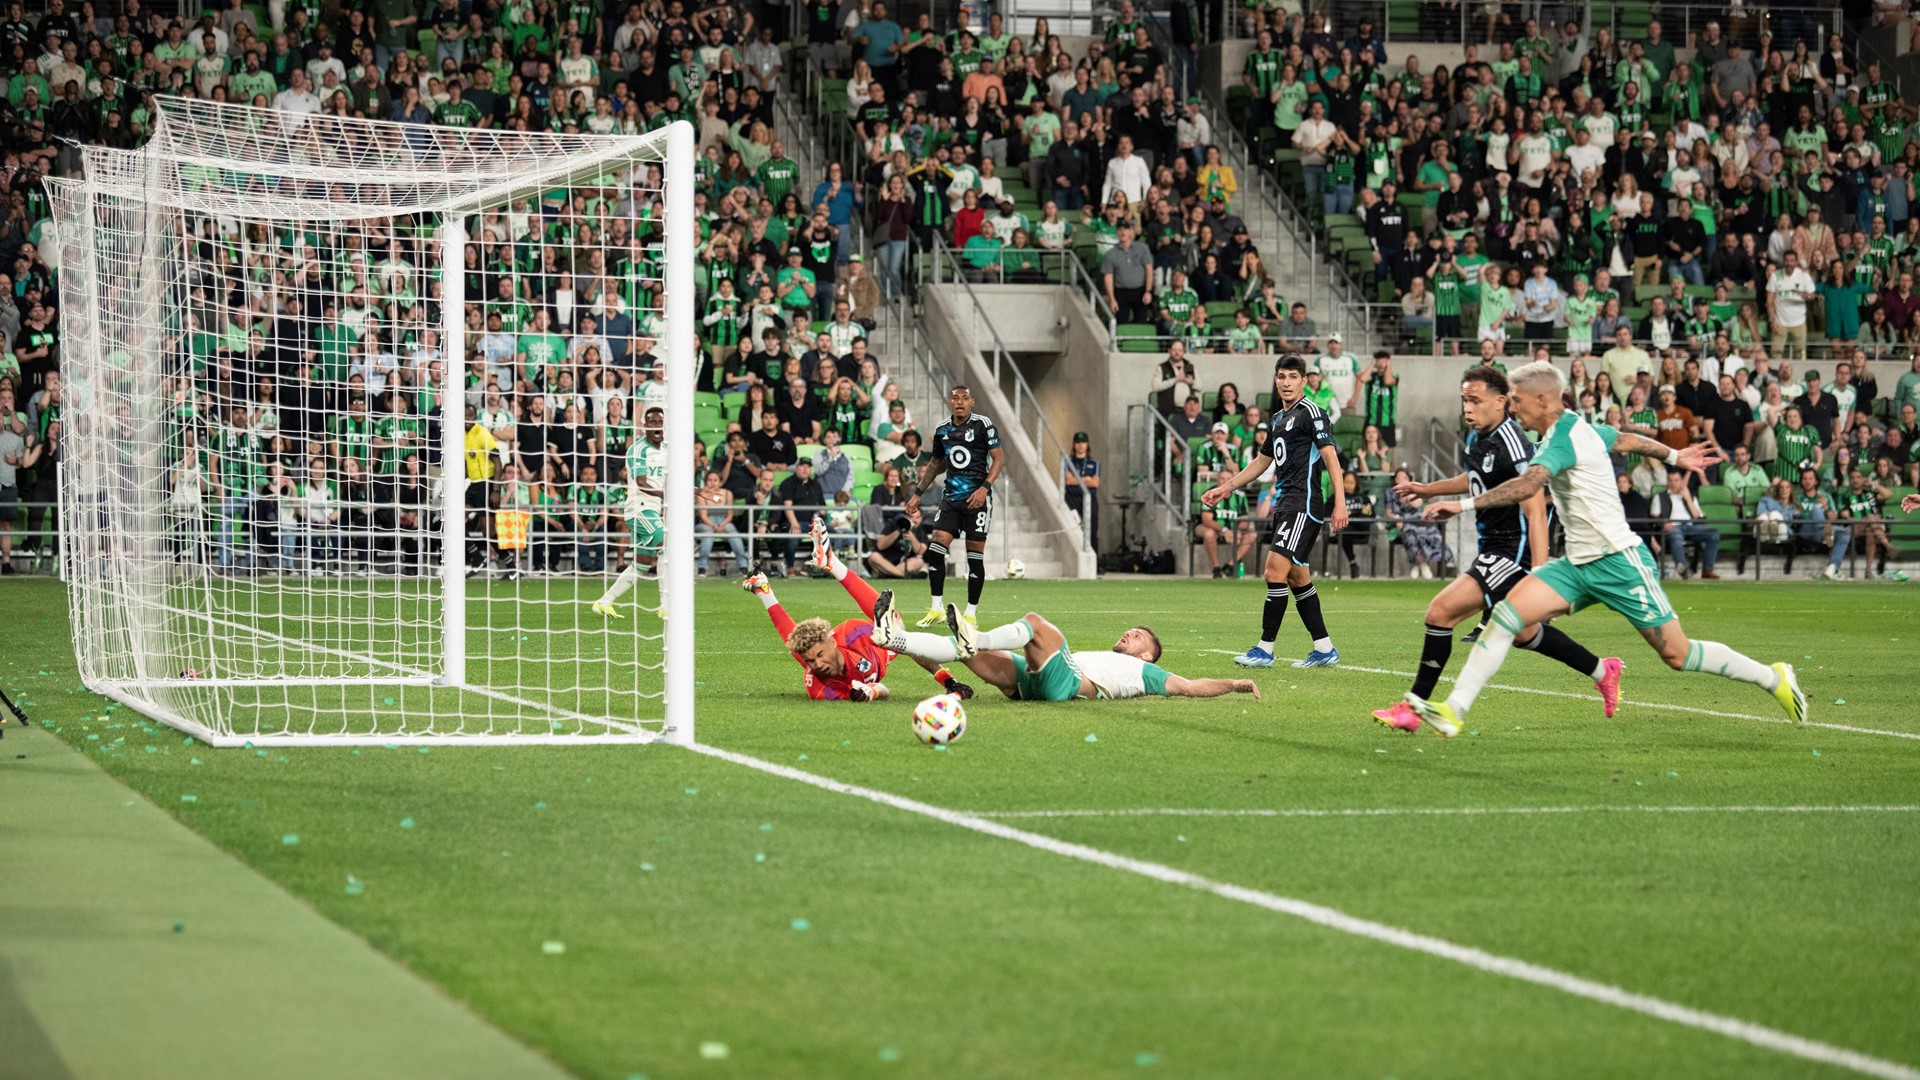 A late goal wasn't enough to propel the Verde & Black past Minnesota.